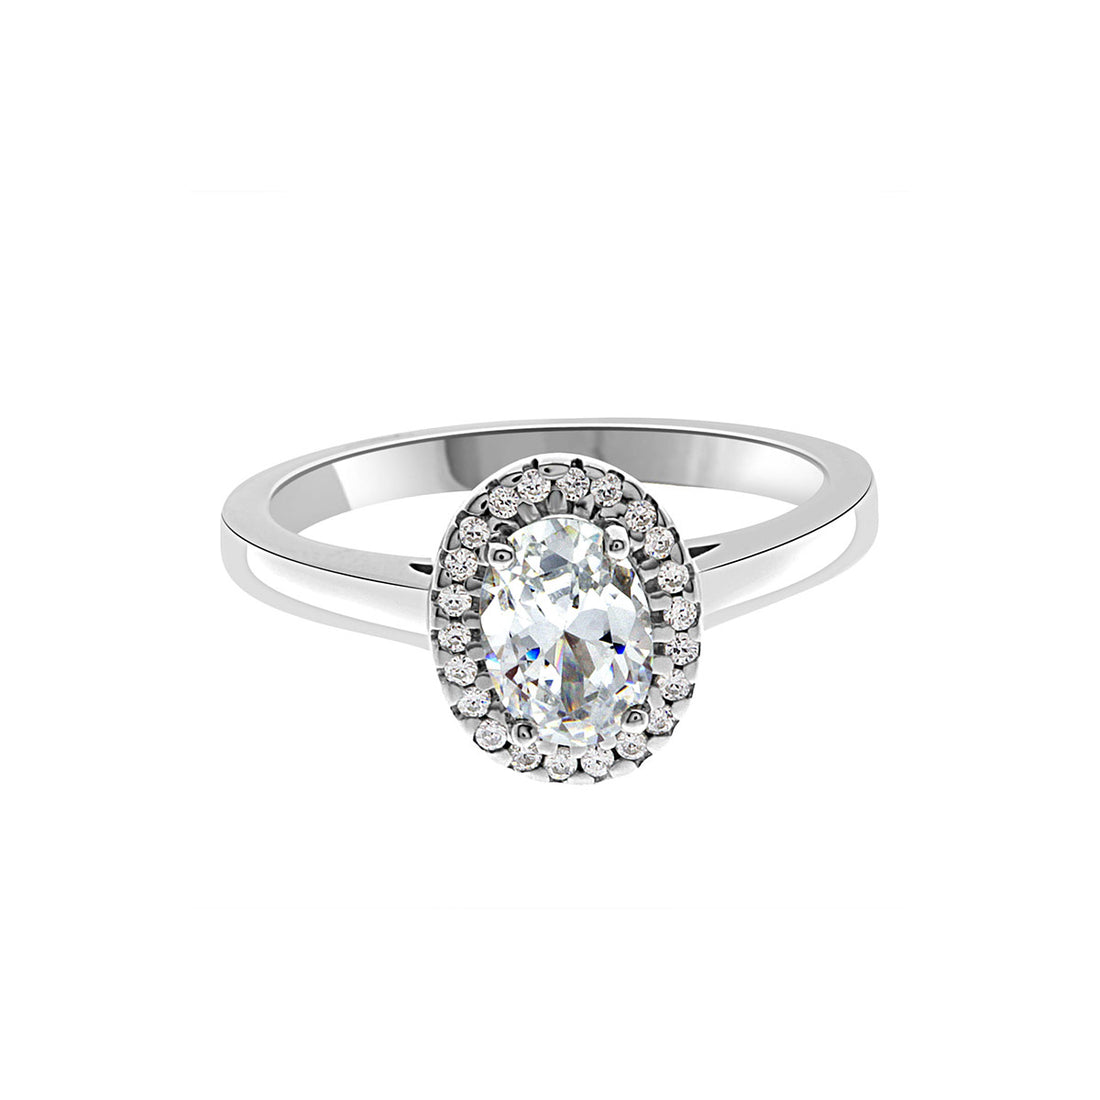 Oval Vintage Engagement Ring in white gold